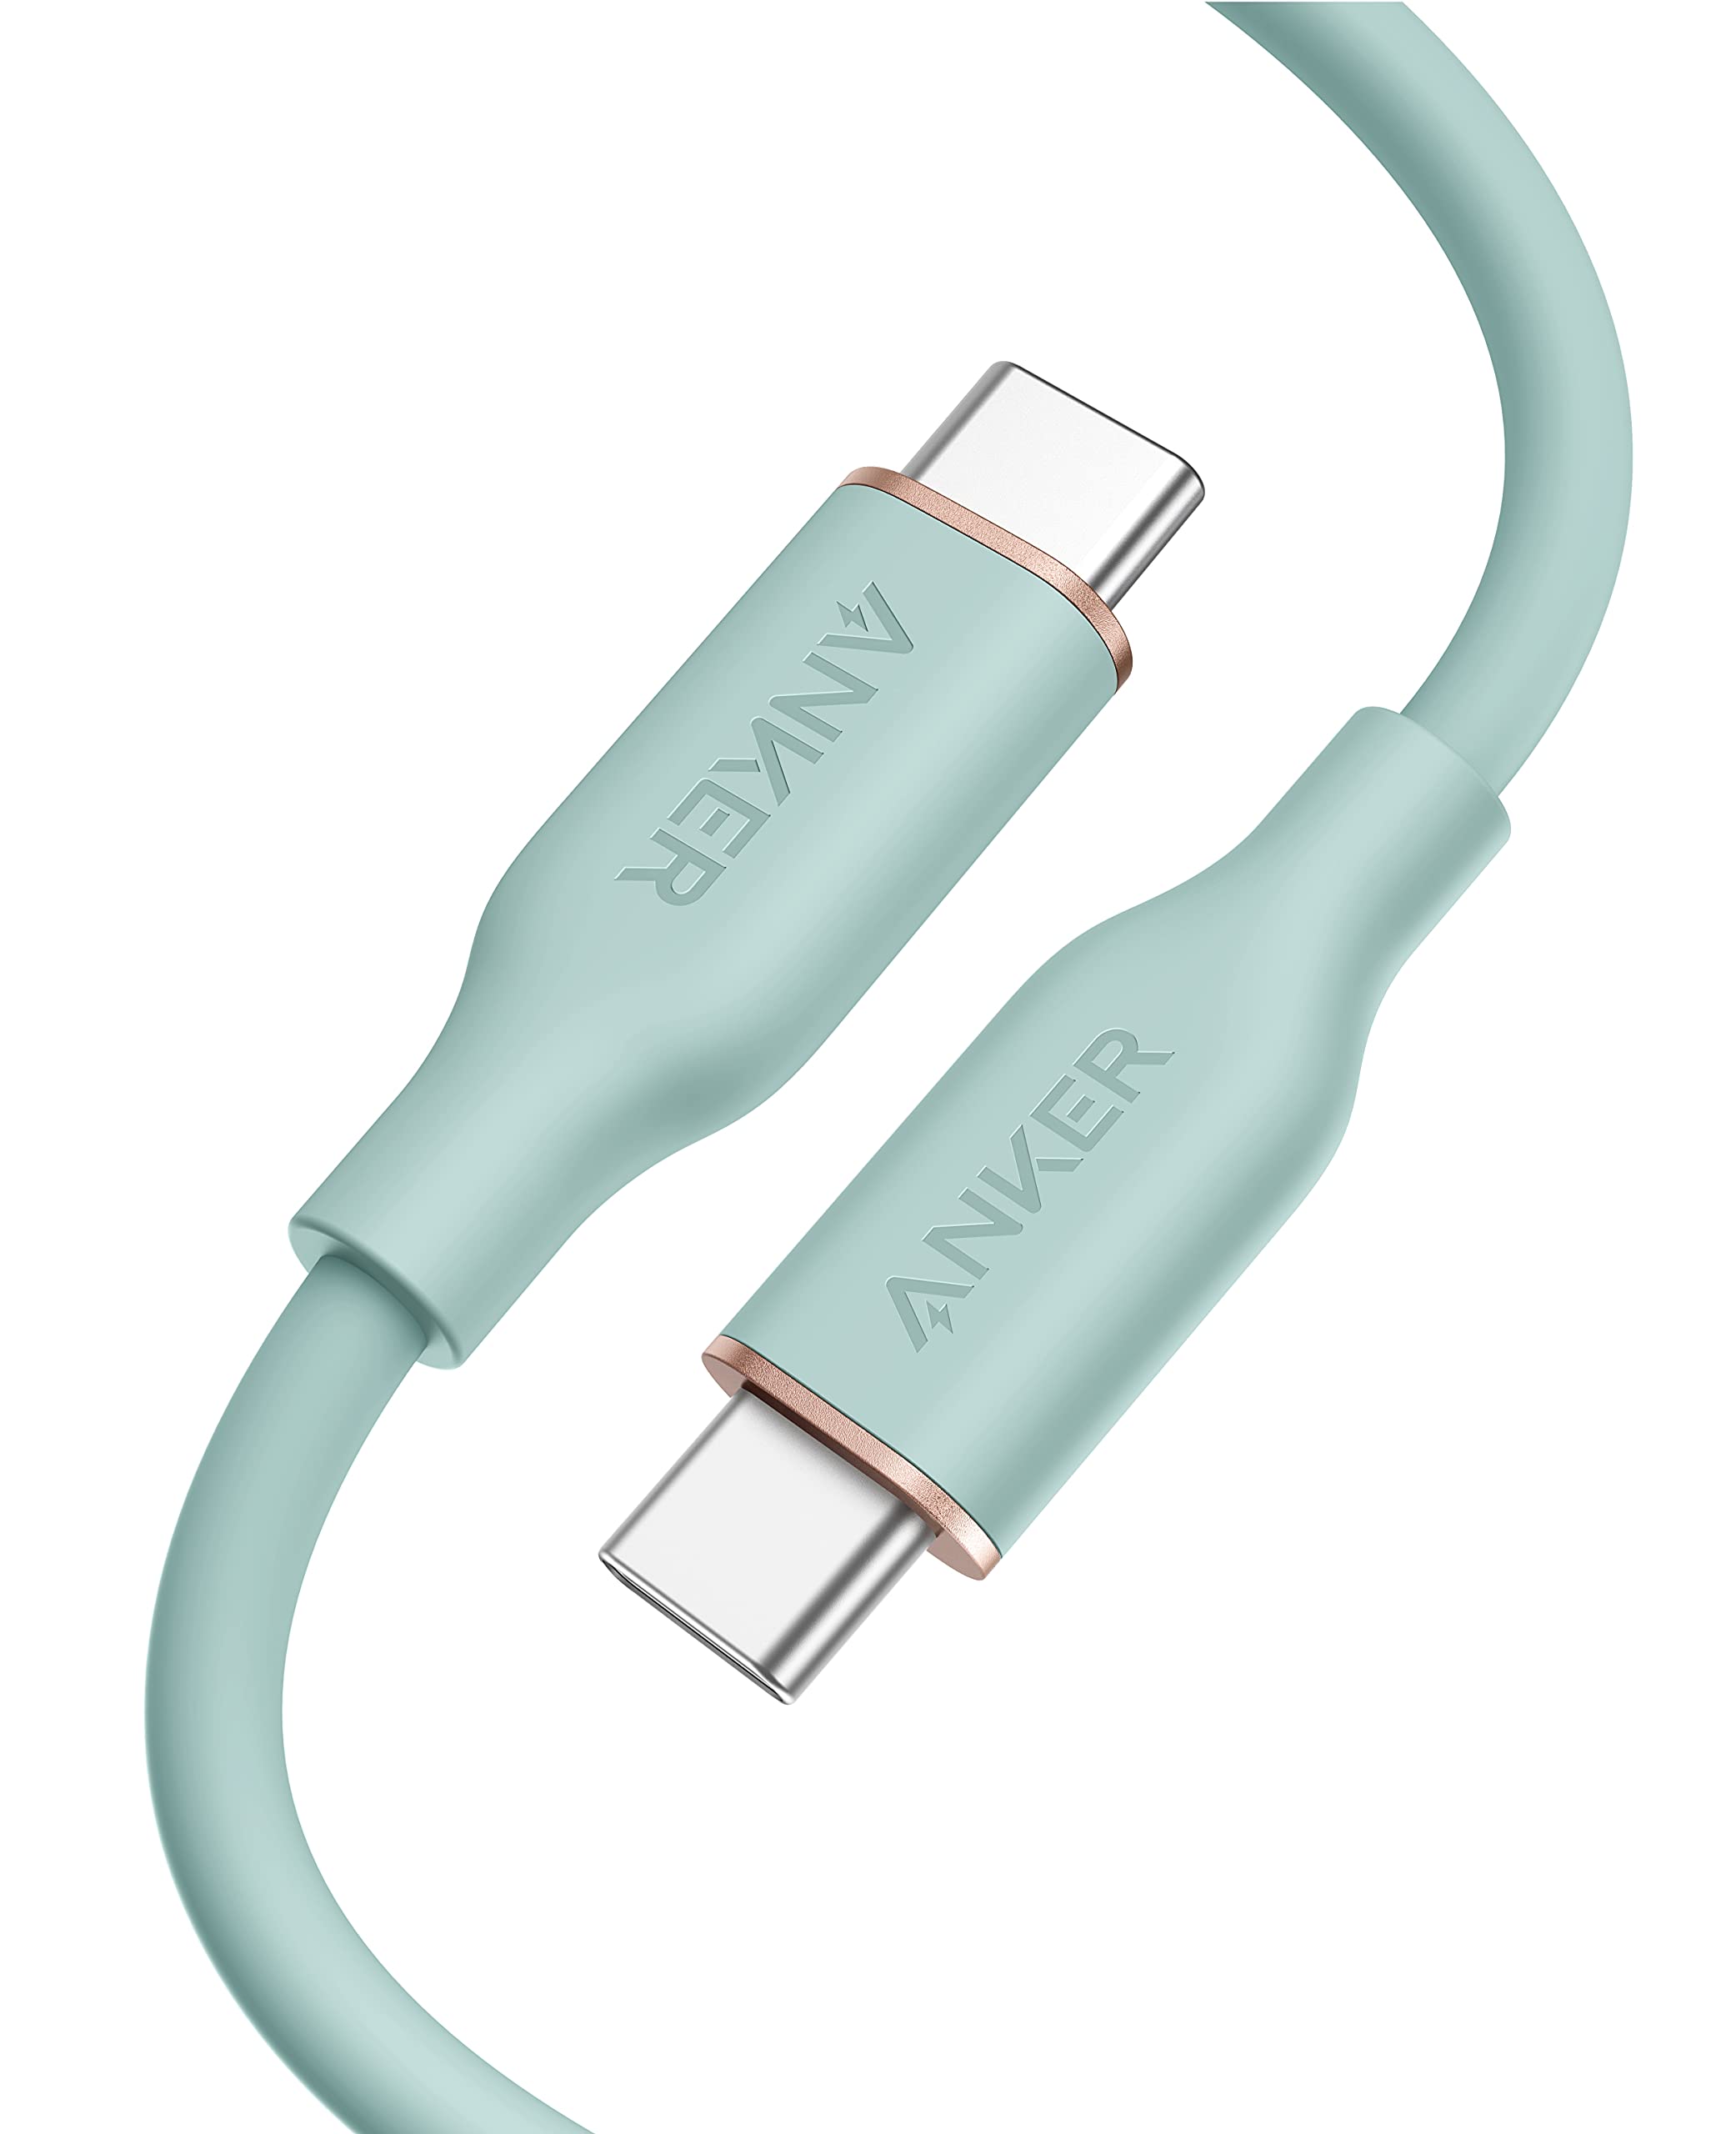 Anker 643 USB-C to USB-C Cable (Flow, Silicone) 3ft / Mint Green